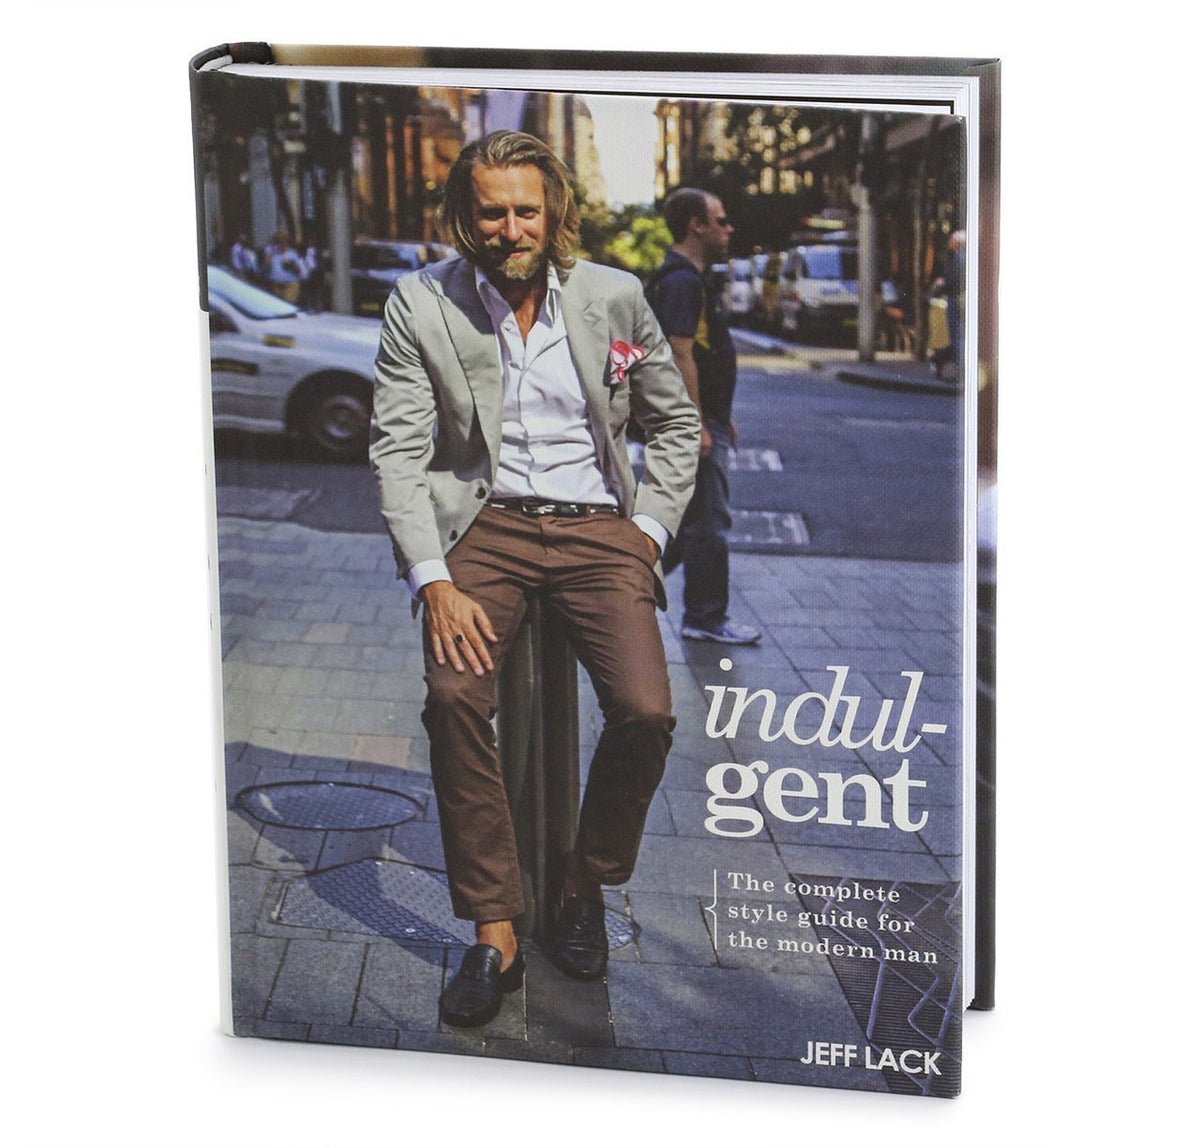 Indulgent: The Complete Style Guide For The Modern Man by Jeff Lack